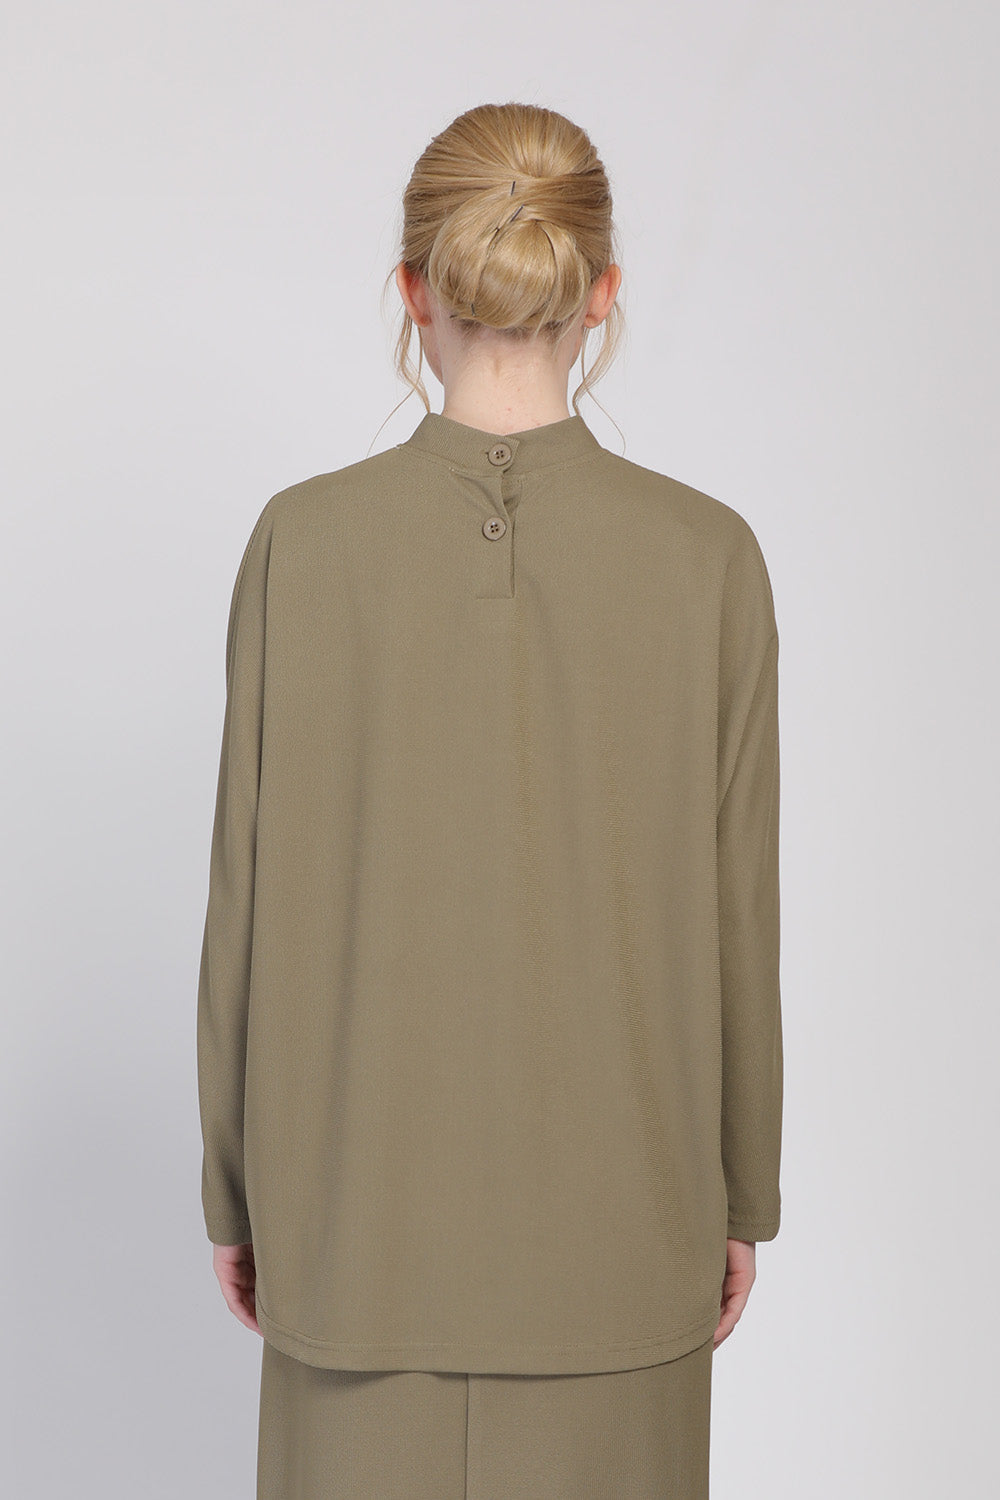 The Cahaya Knit Top in Dusty Green